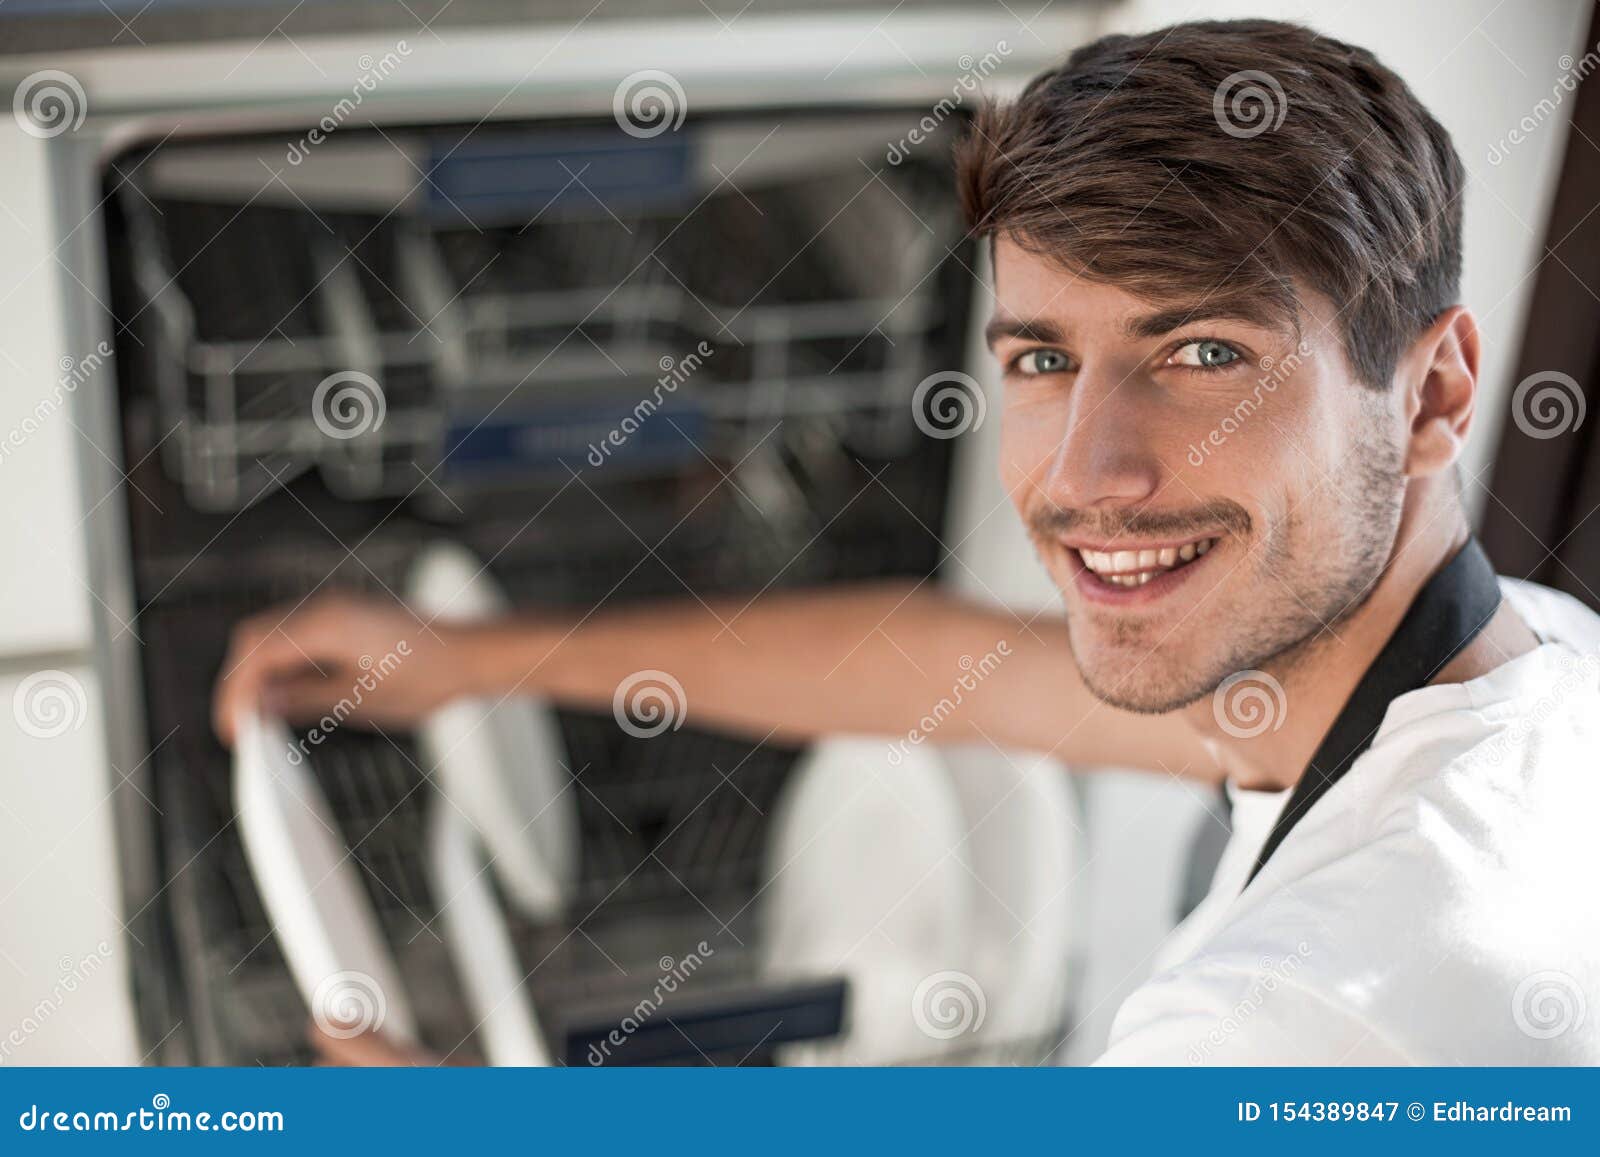 Close Up. Handsome Young Man Using Dishwasher Stock Image